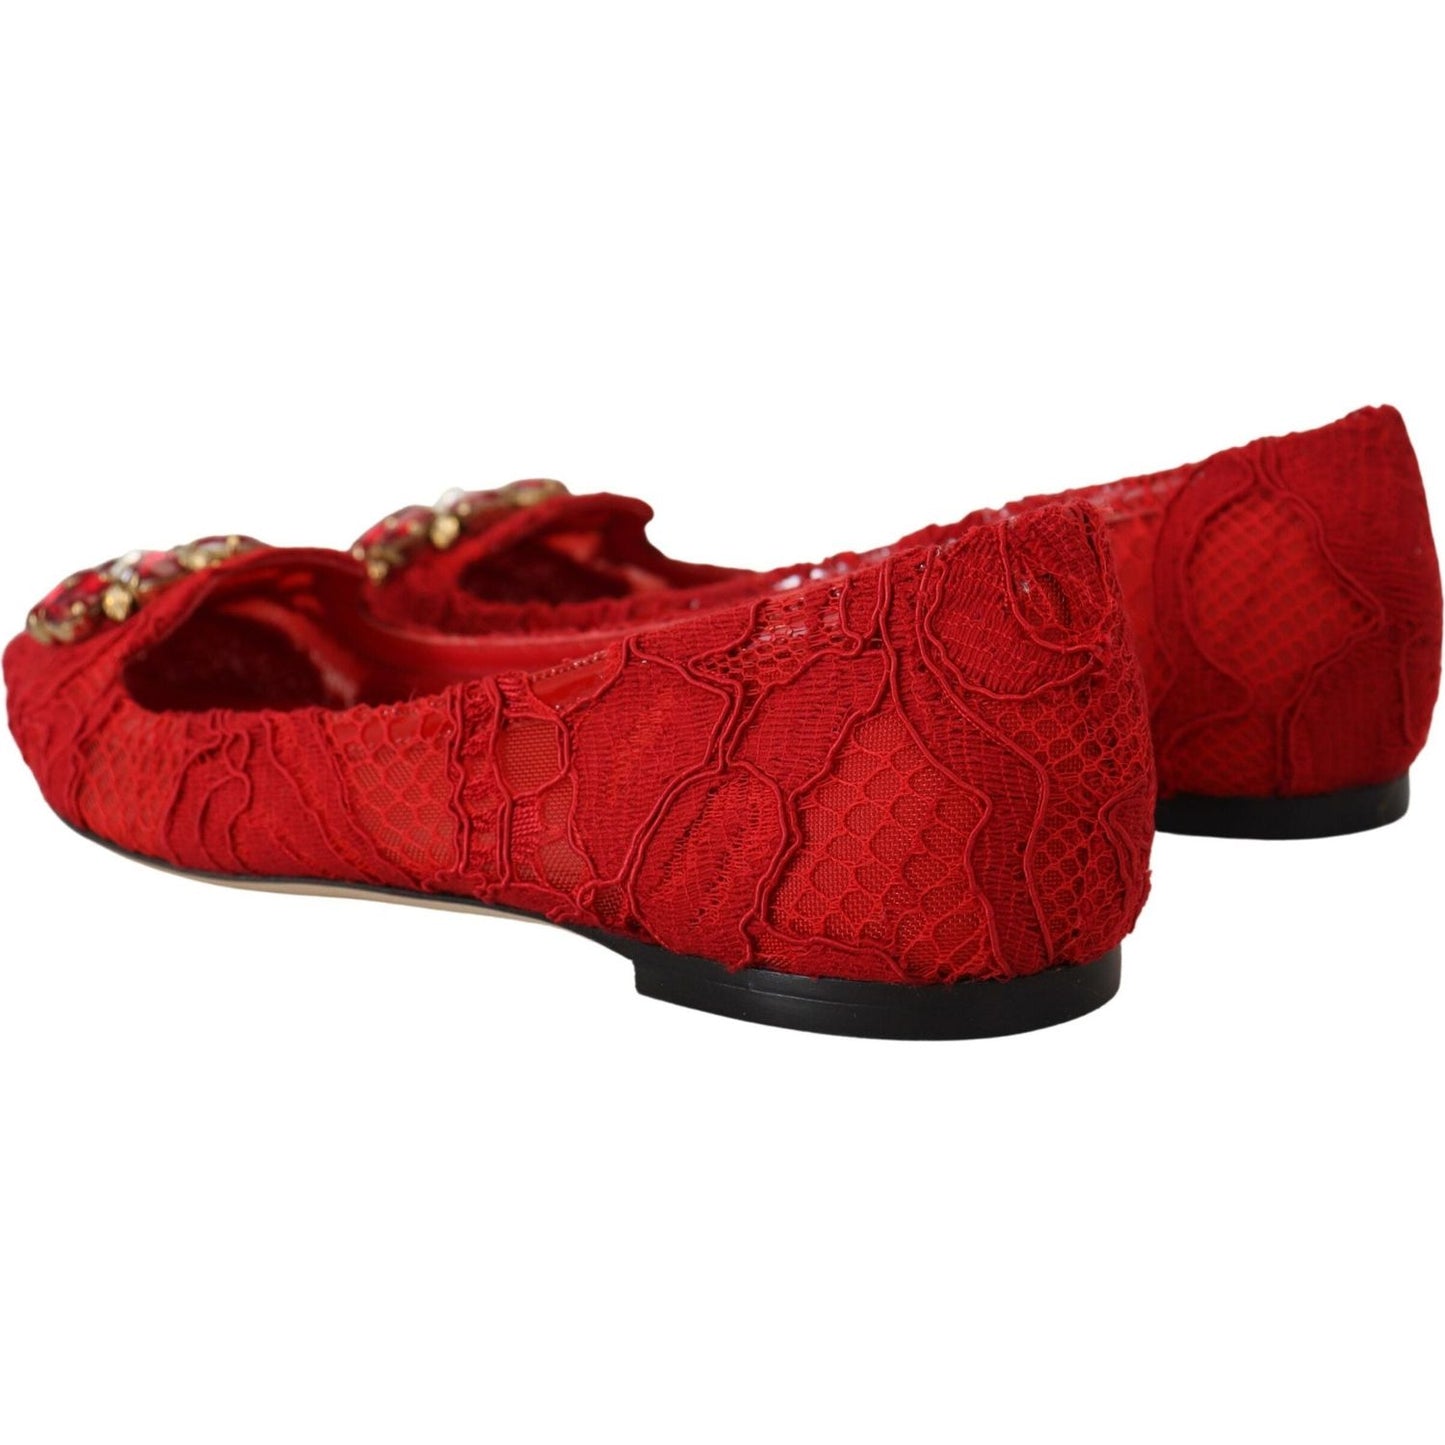 Dolce & Gabbana Red Crystal-Embellished Flats red-taormina-crystals-loafers-flats-shoes